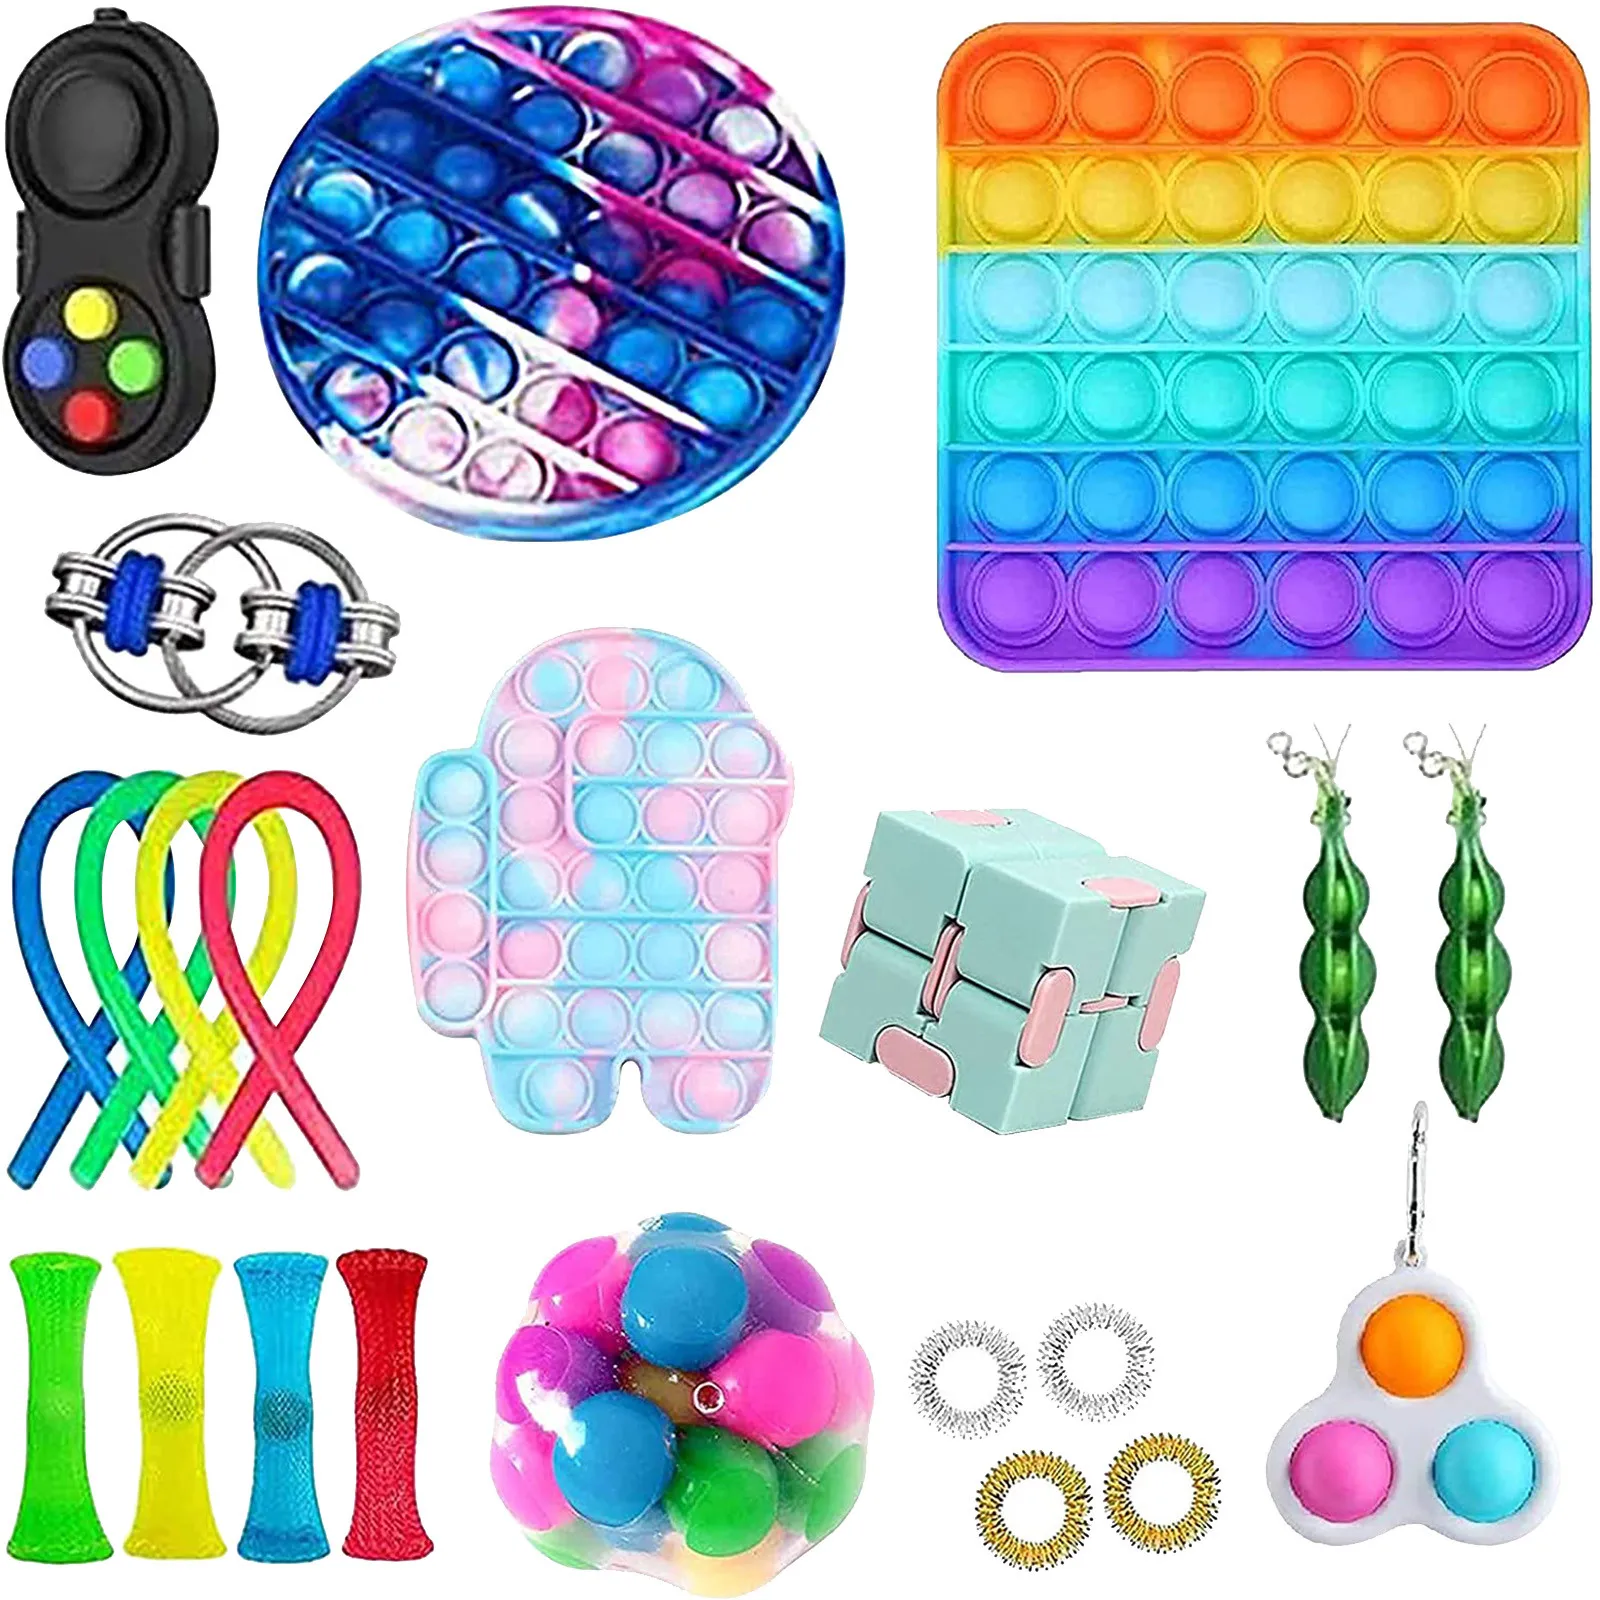 

AntisTress Relief Figet Fidget Toys Set Antistress Pack Strings Marble Relief Gift Adults Children Box Sensory Toys симпл димпл